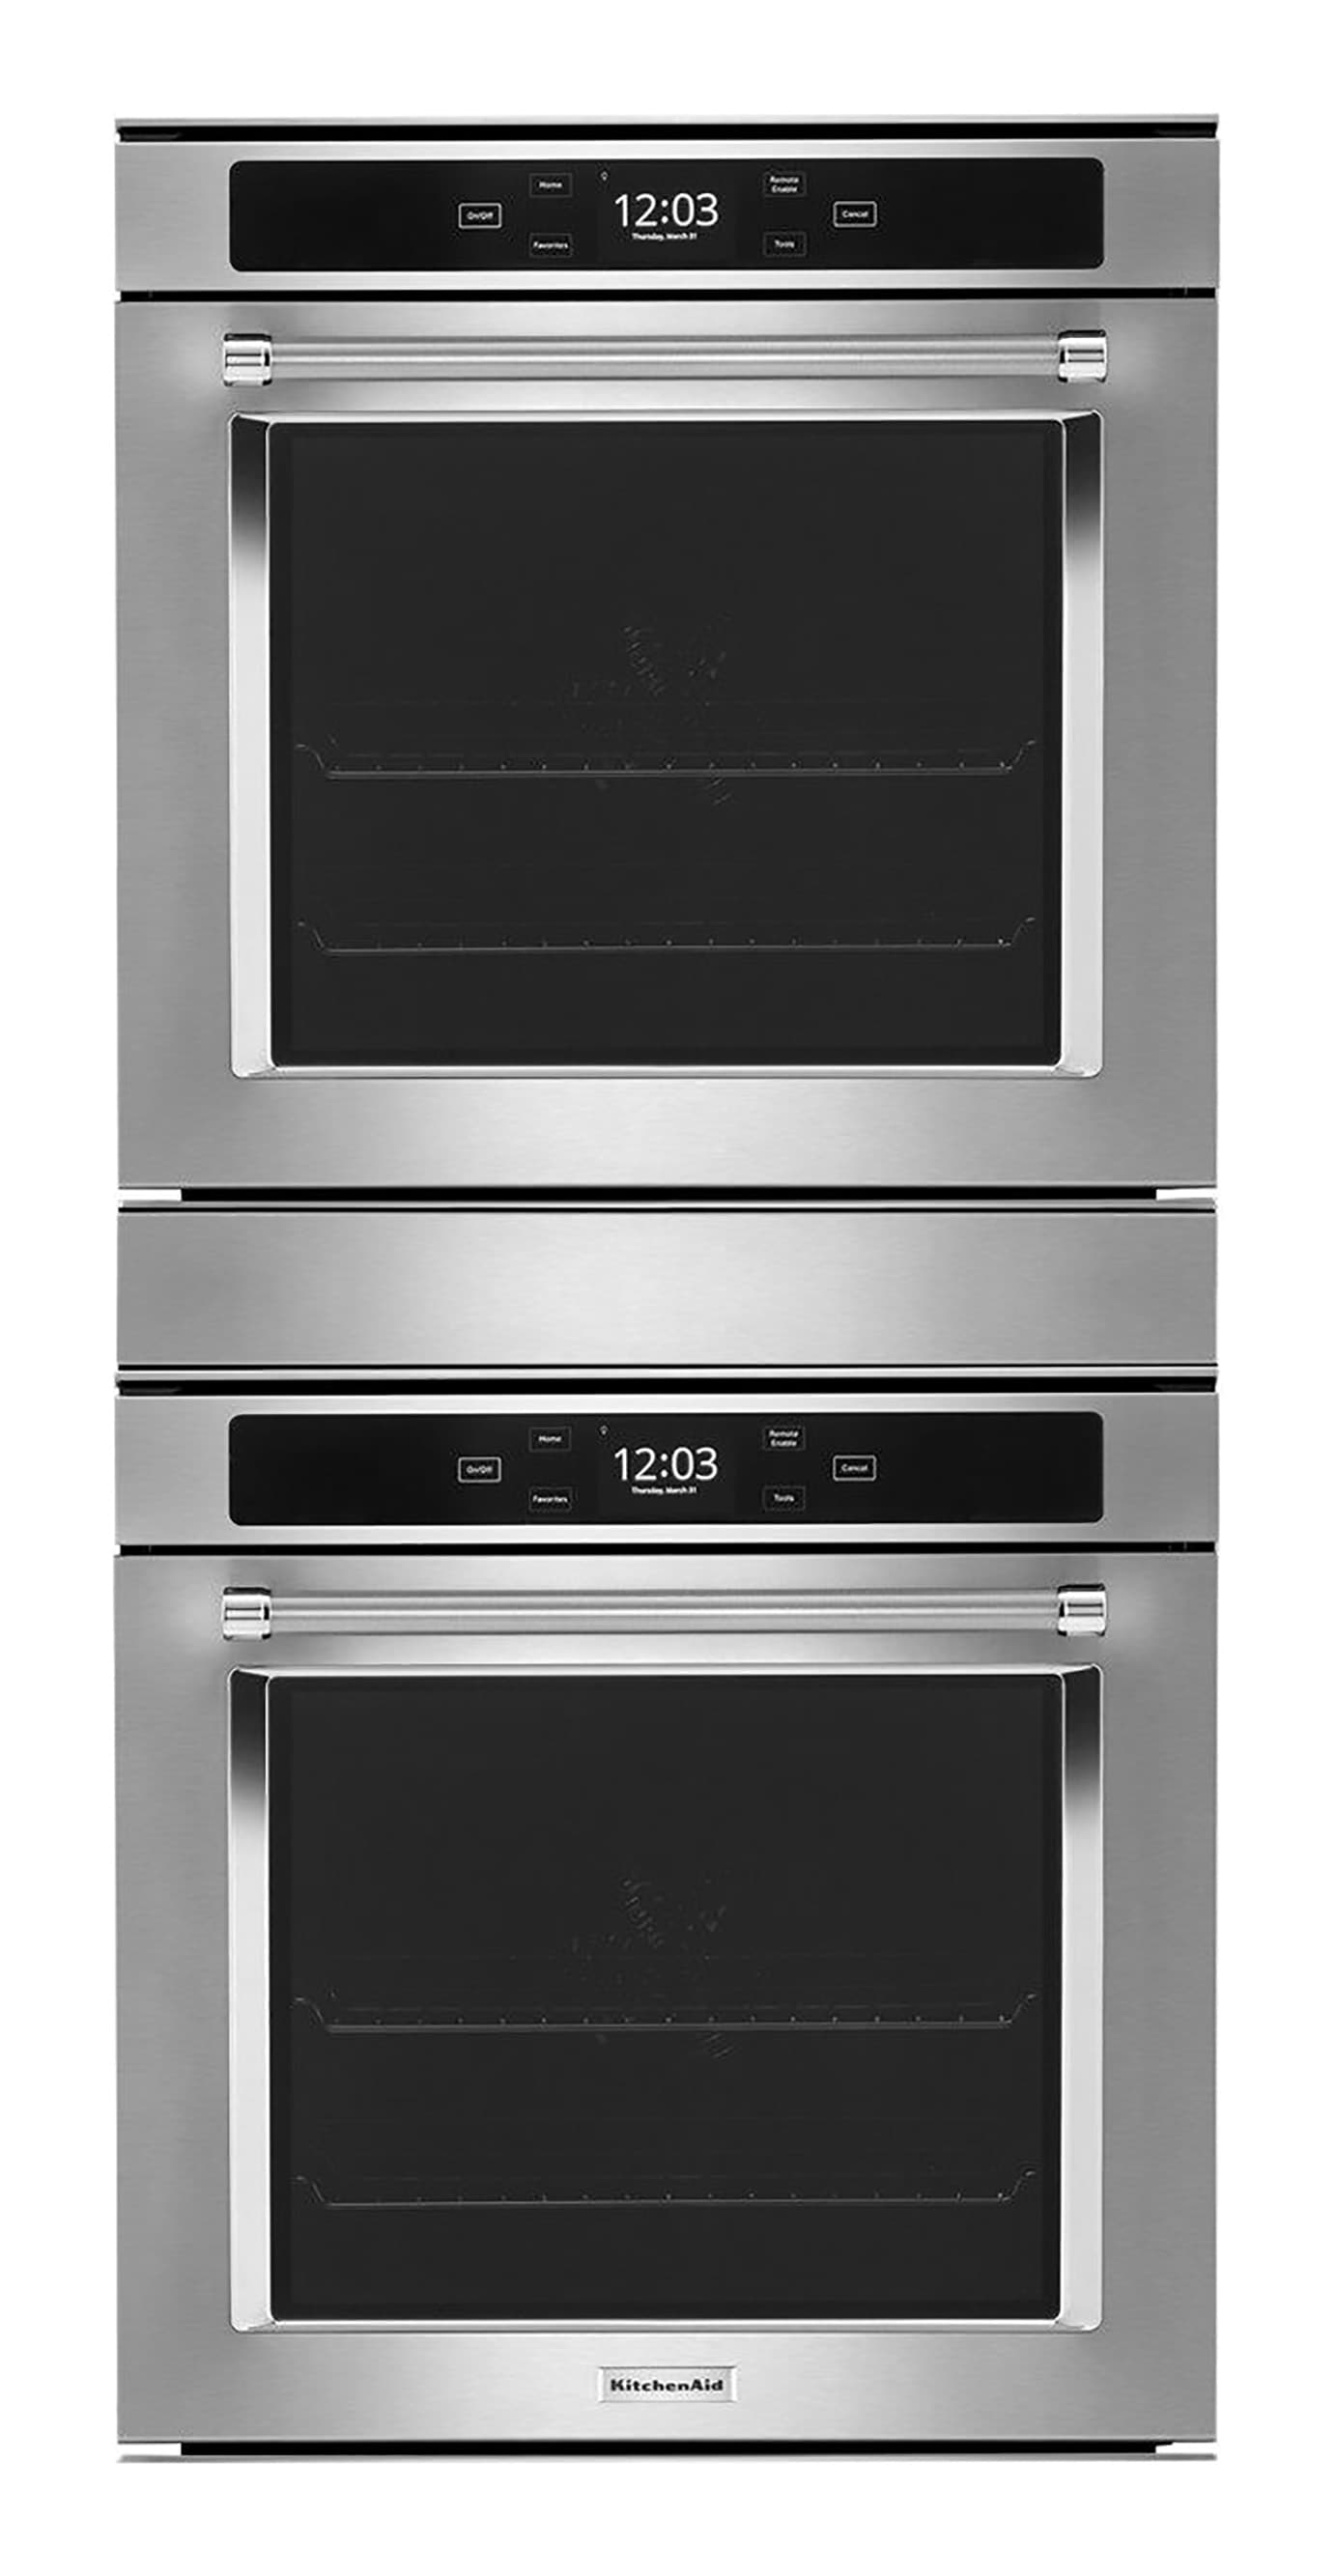 Kitchenaid 24 Inch Double Electric Wall Ovens At